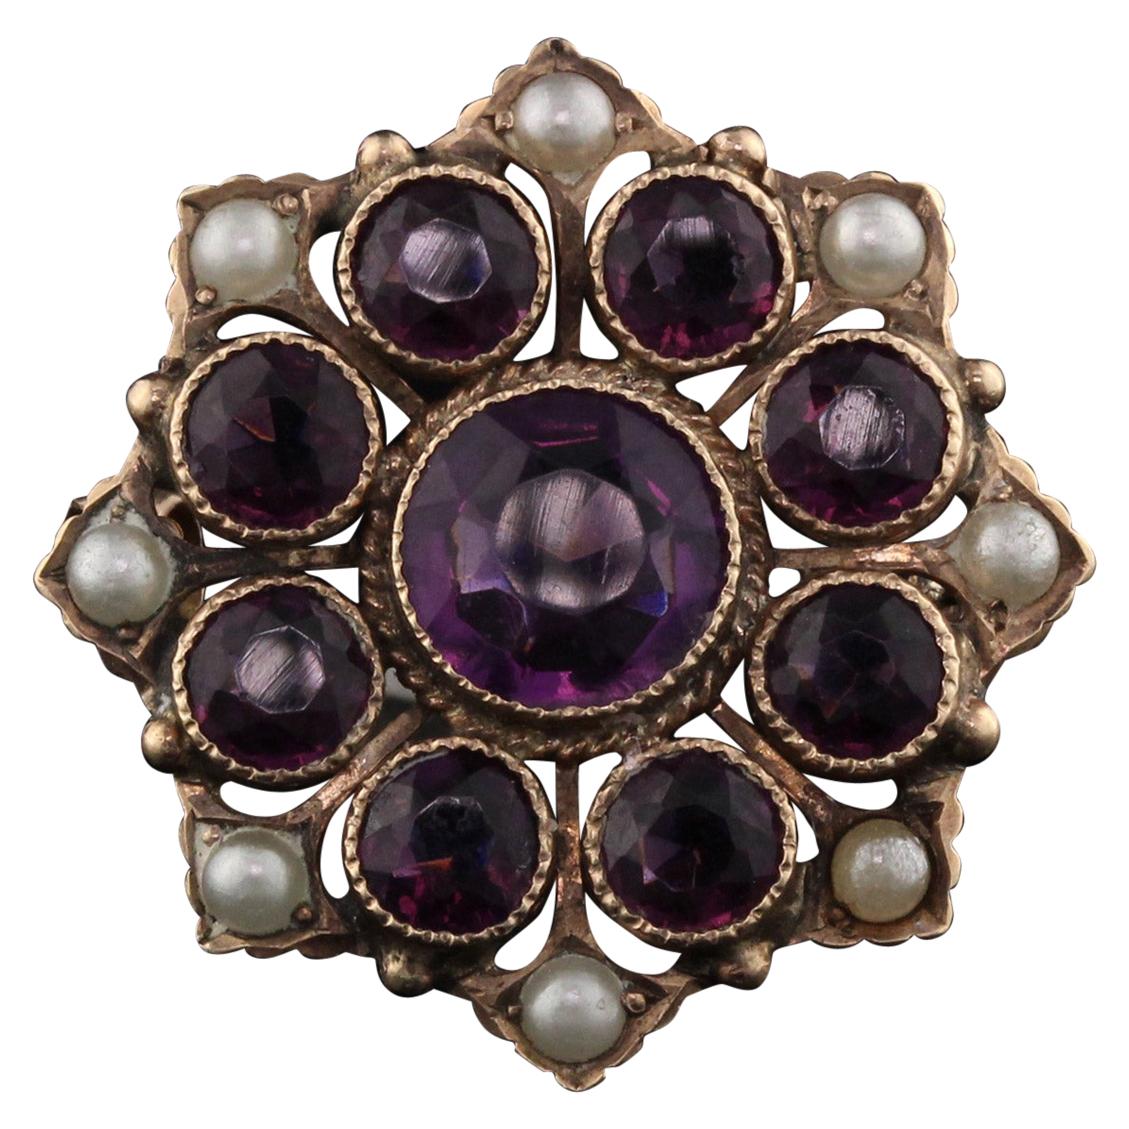 Antique Victorian 14 Karat Yellow Gold, Amethyst and Pearl Brooch